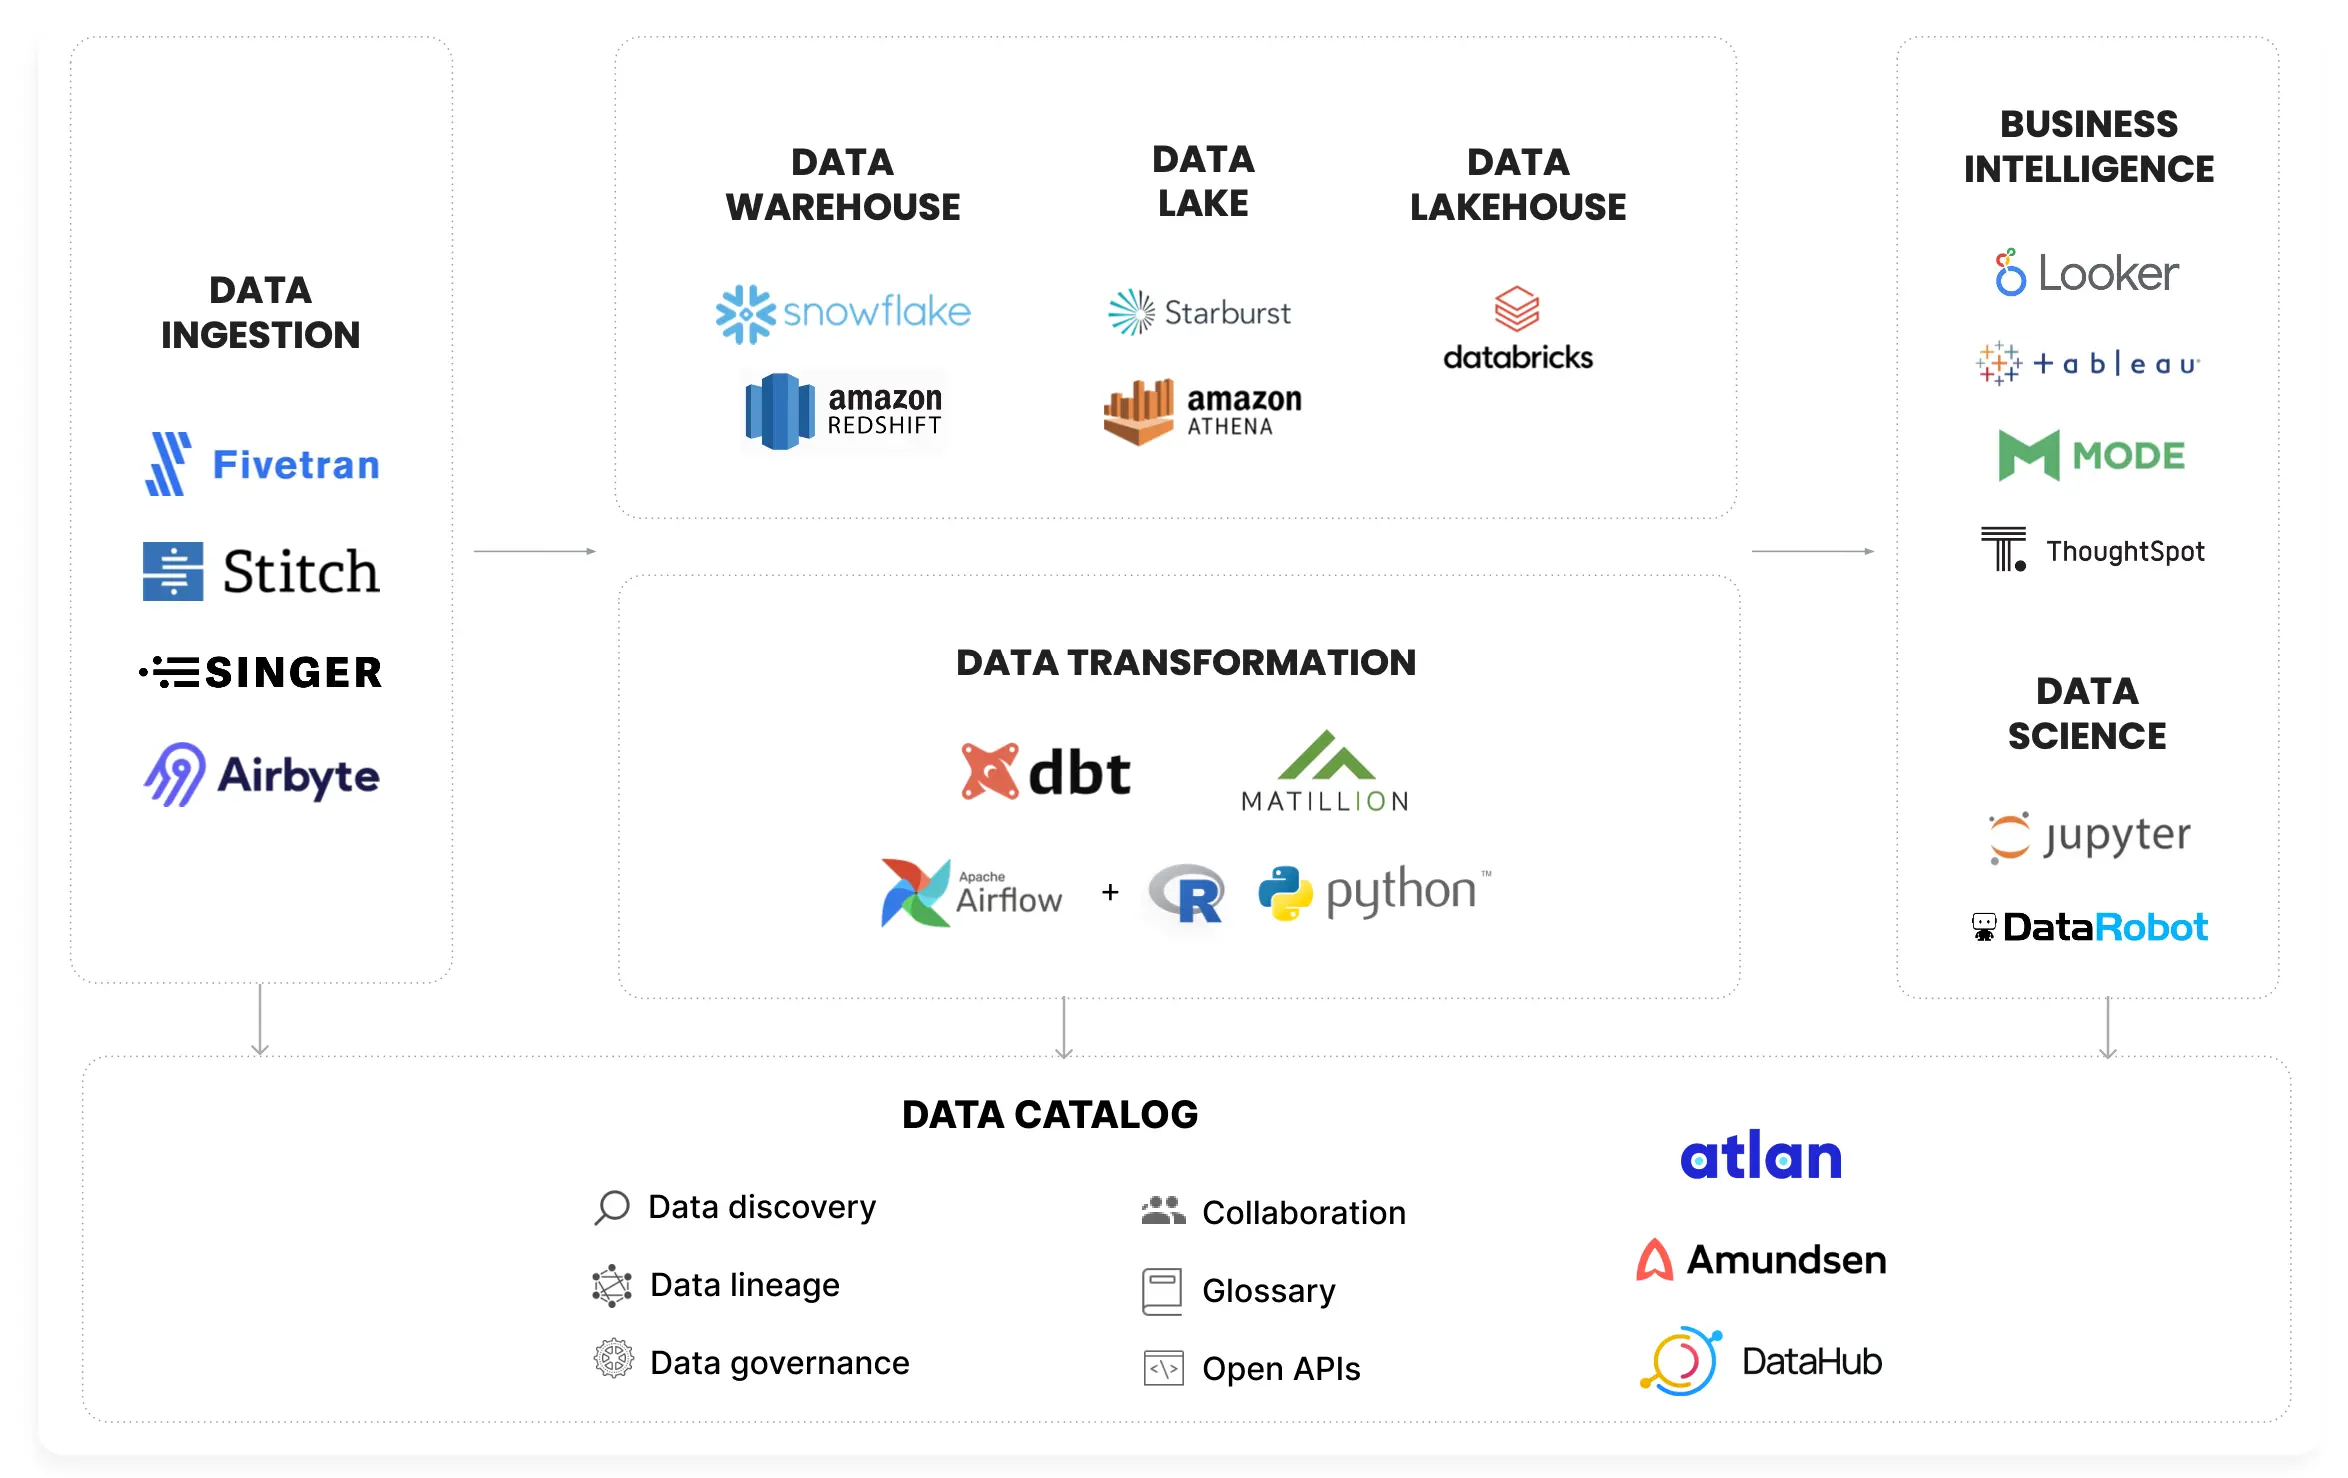 Data catalog integrating with diverse data sources and data tools. Source: Atlan